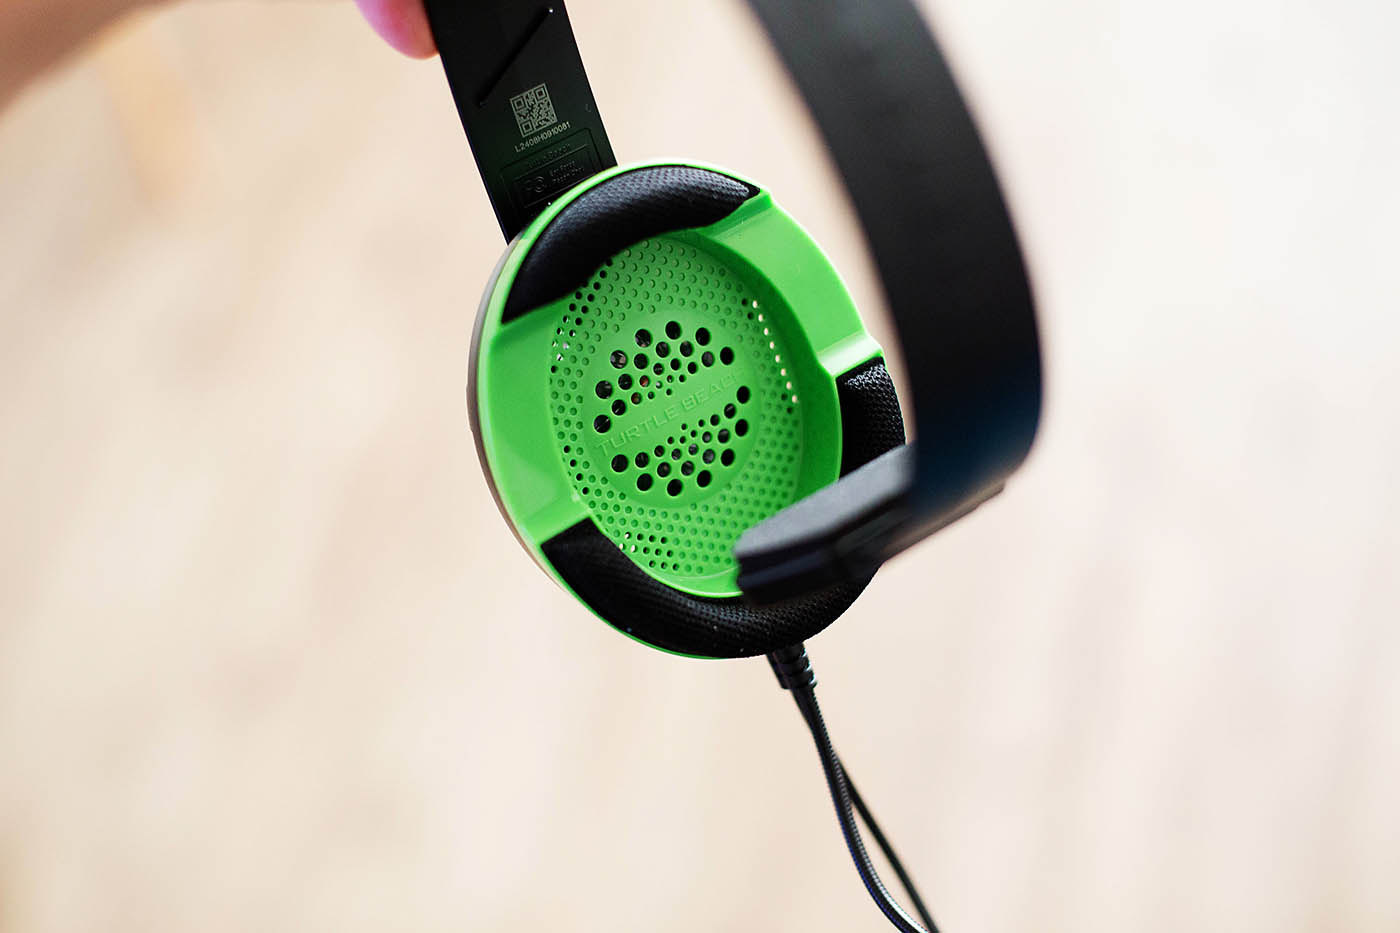 xbox one turtle beach ear force recon chat